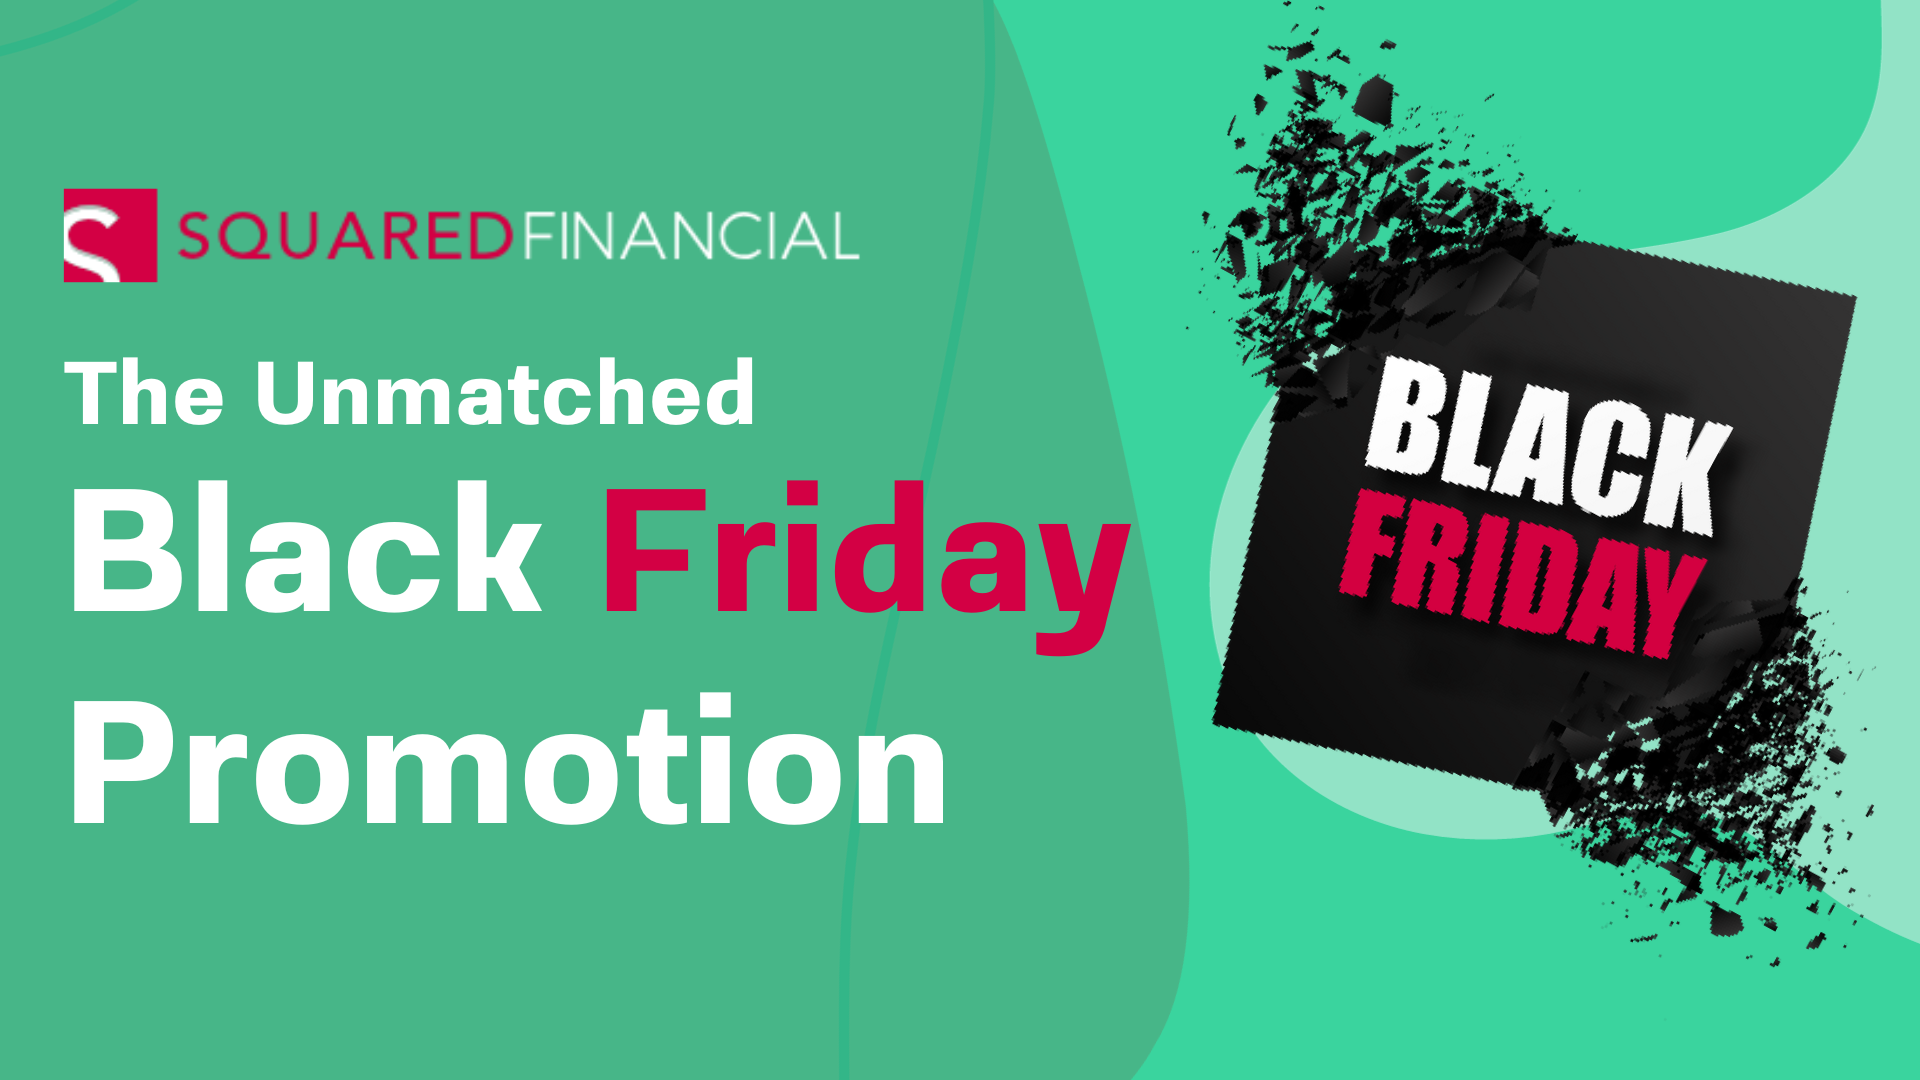 Black Friday Promotion – Squared Financial